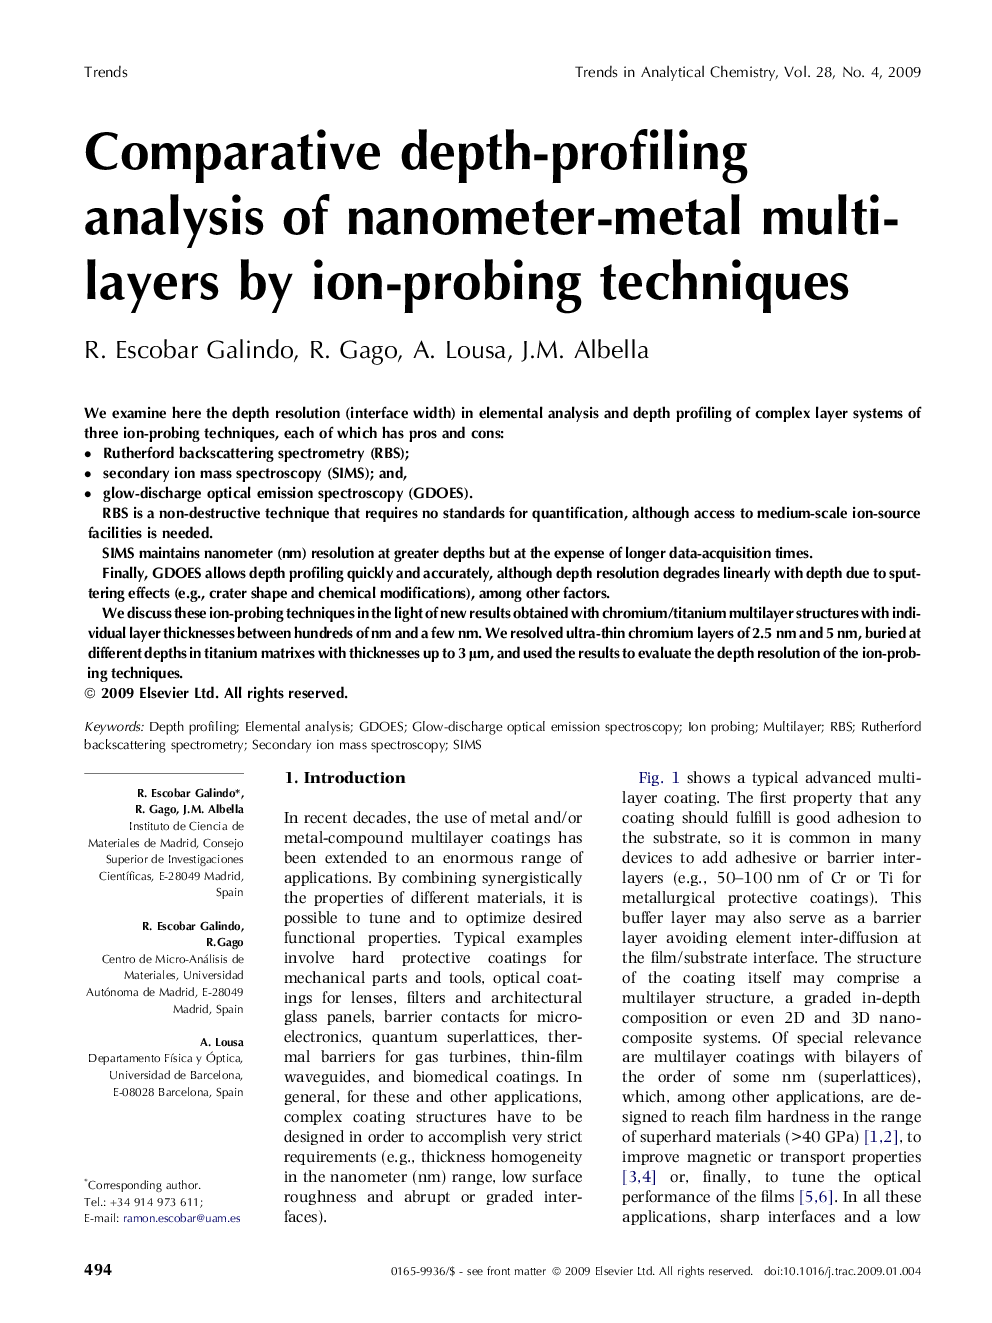 Comparative depth-profiling analysis of nanometer-metal multilayers by ion-probing techniques